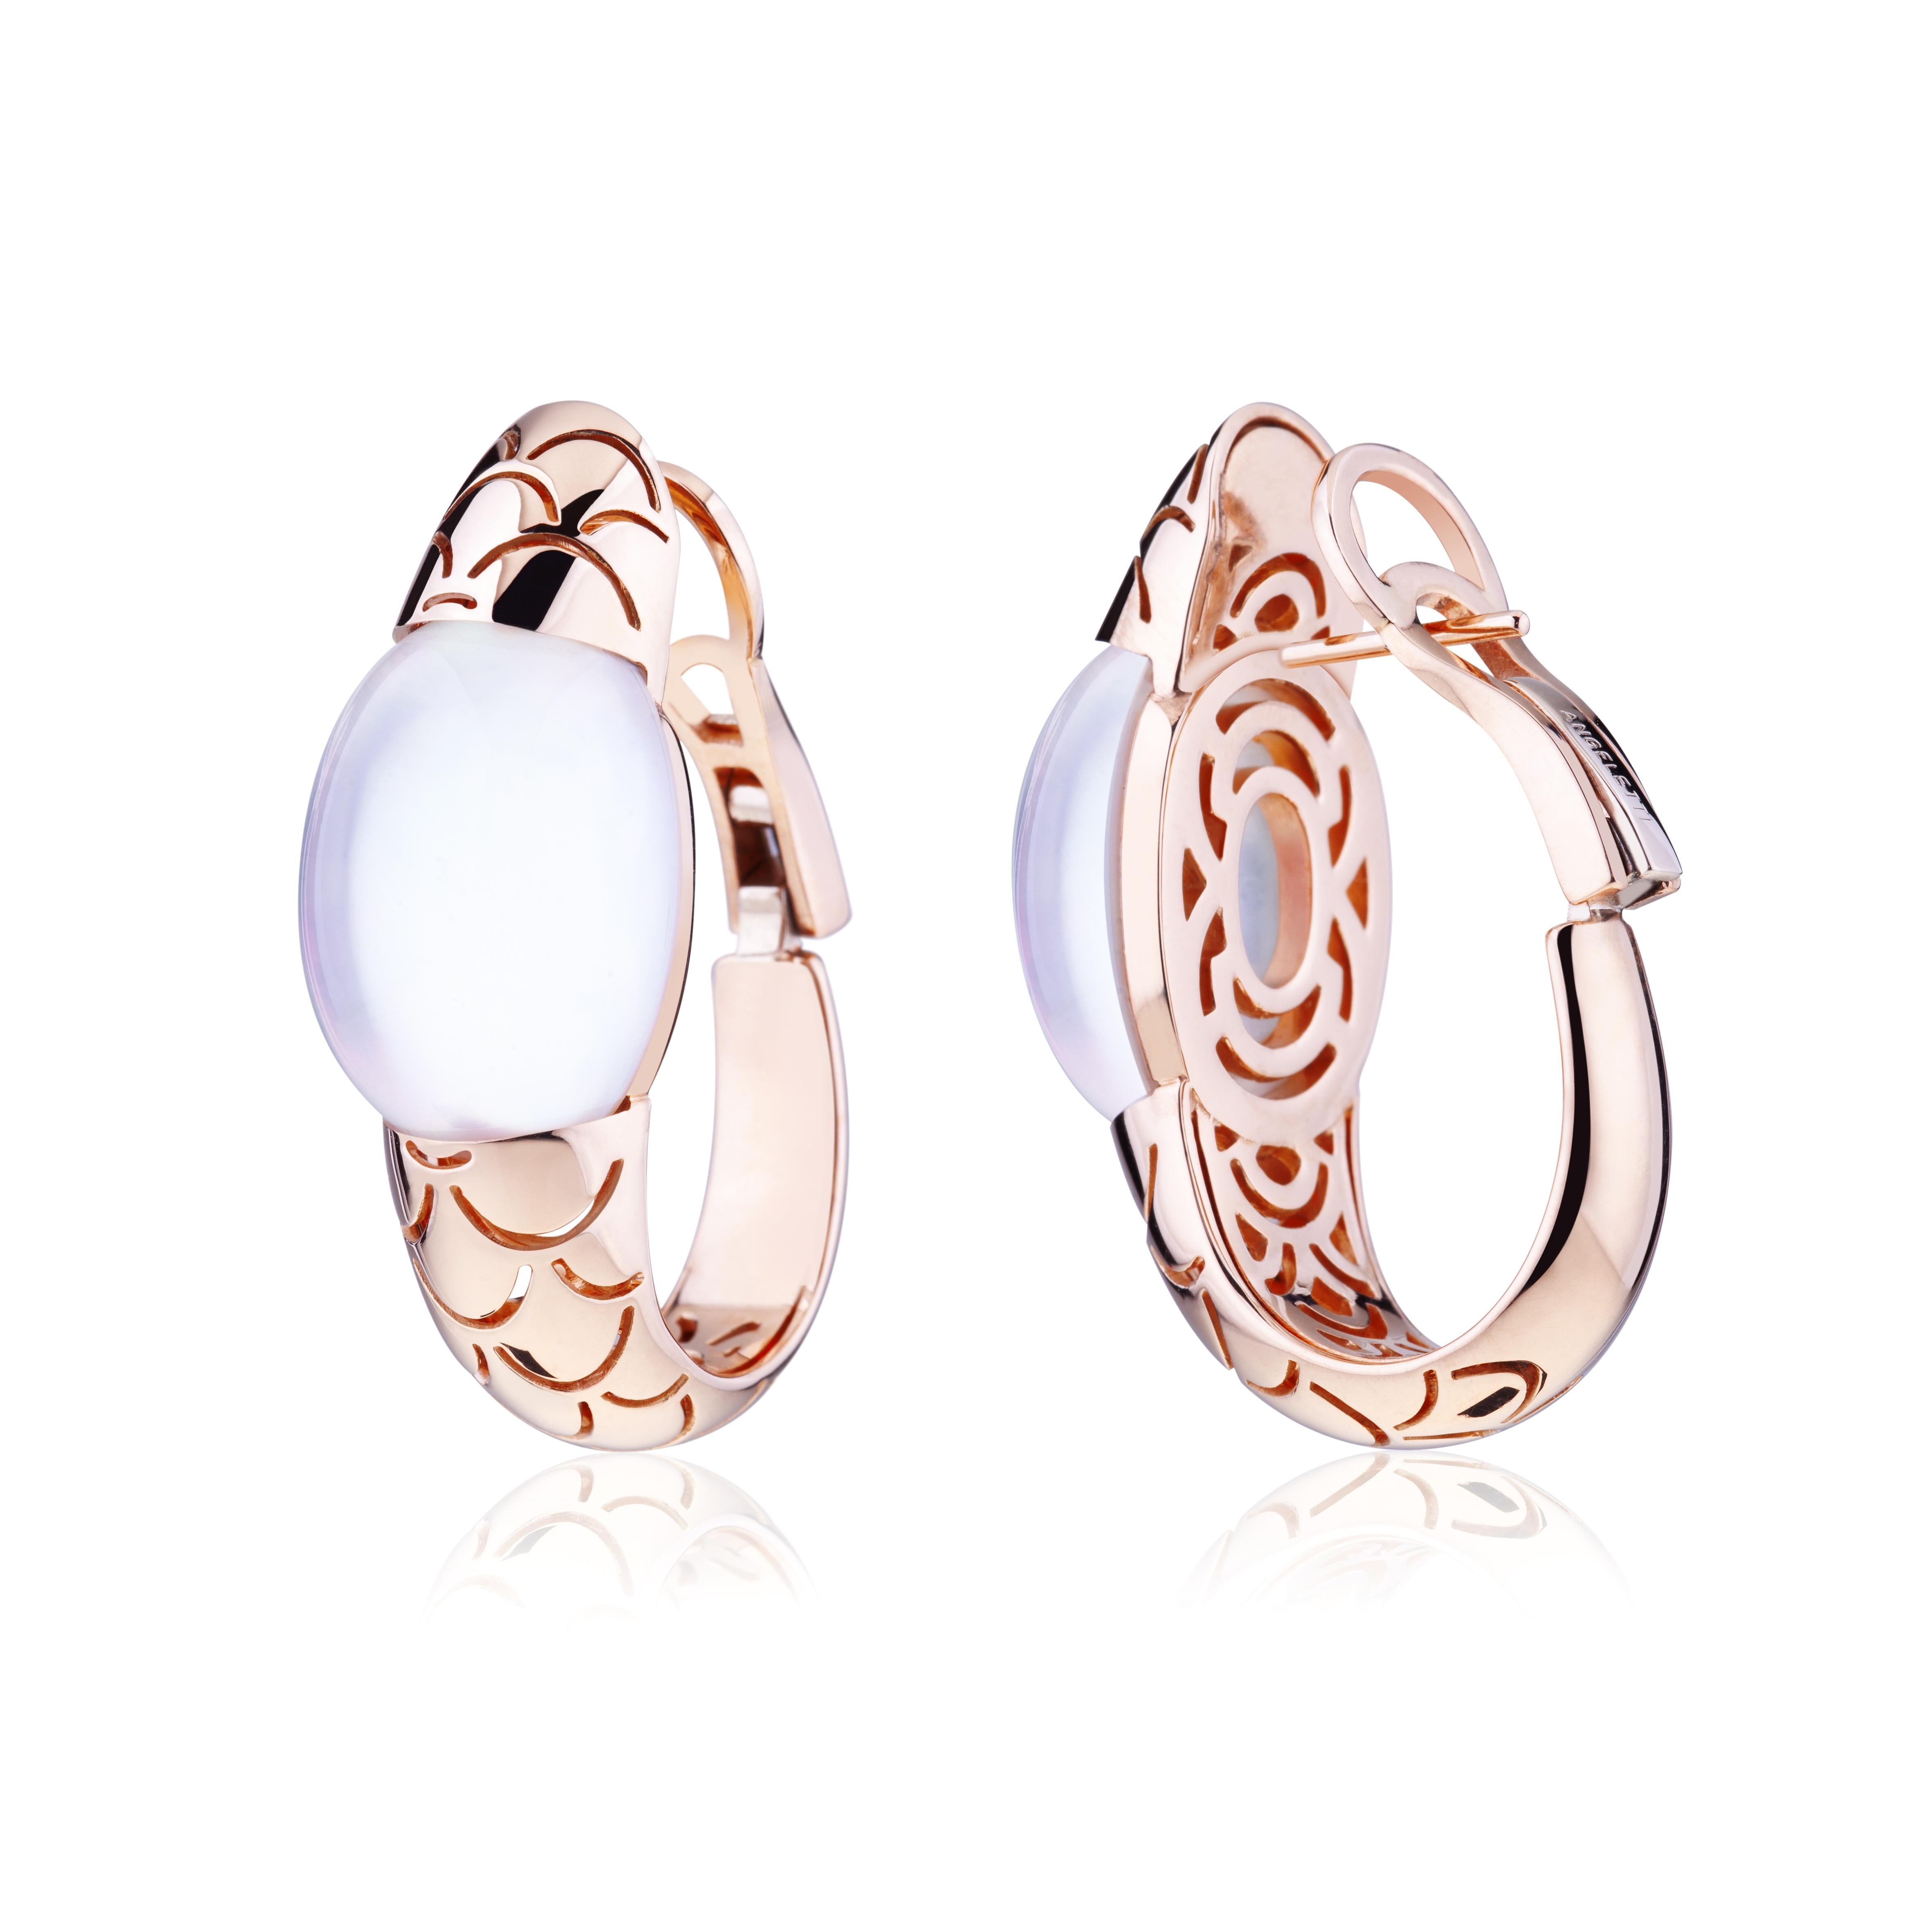 Angeletti Embrace Rose Gold With Cabochon Mother Pearl Hoop Earrings.
New Wave Version, Designed and Manifactured in Rome. Large size and impressive proportions. 
Angeletti Boasts an Exceptional History Made of Pure Jewelry Tradition, a Blend of